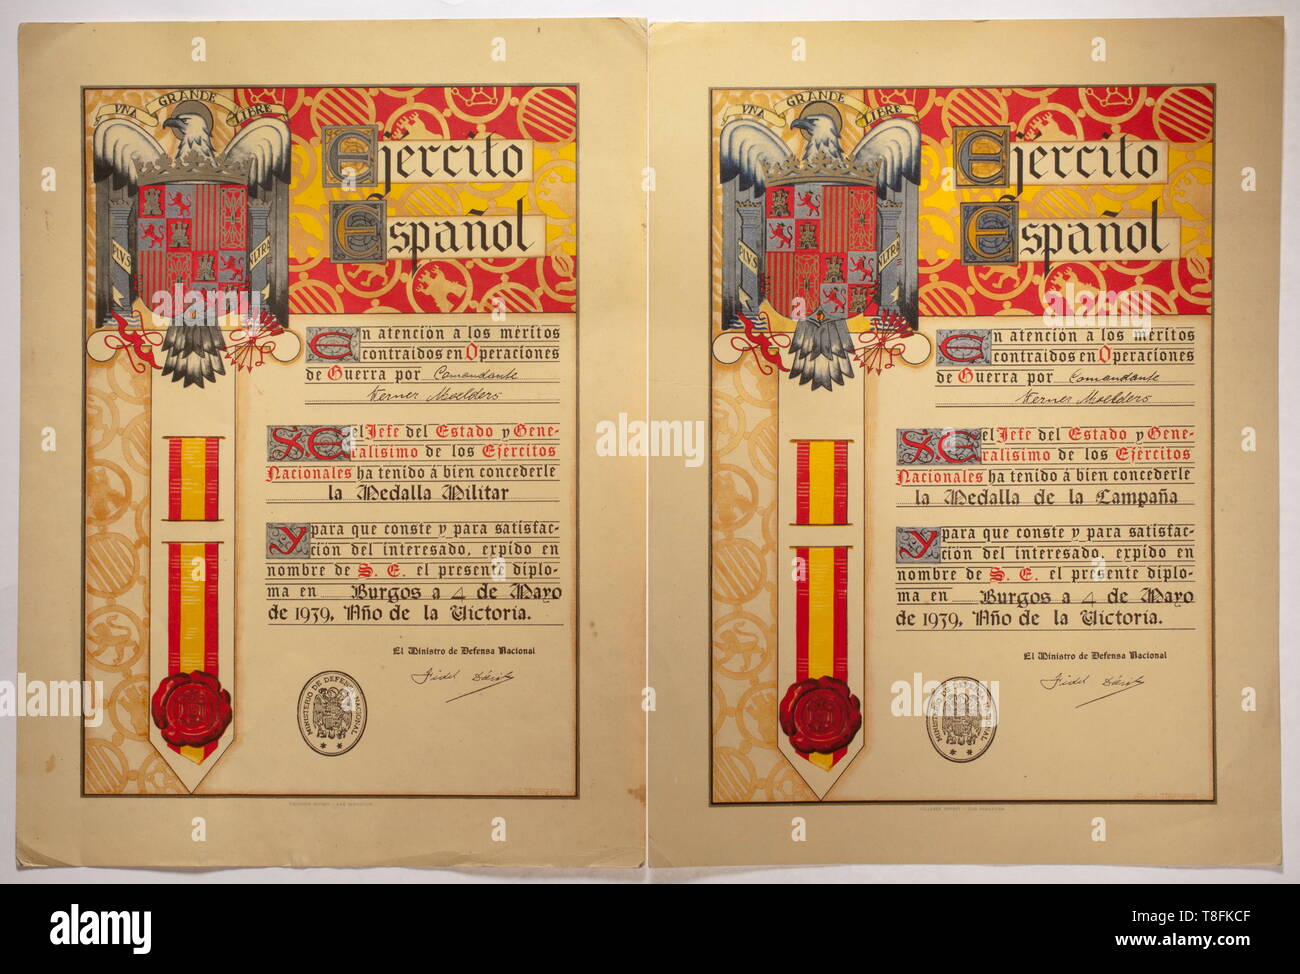 Oberst Werner Mölders - an award document for the Spanish Medalla Militar and Medalla de la Campana Large polychrome printed decorative document of the firm 'TALLERES OFFSET - SAN SEBASTIAN' issued to 'Comandante Werner Moelders' in the year of victory, 4 May 1939, and signed (stamp) by Minister of Defense and Lieutenant General Fidel Dávila Arrondo. According to the Spanish orders statutes of 1938, the Medalla Militar was the third highest award of the country and a highly regarded decoration for bravery, which in Spain, similar to the Victoria Cross, was primarily awarded, Editorial-Use-Only Stock Photo